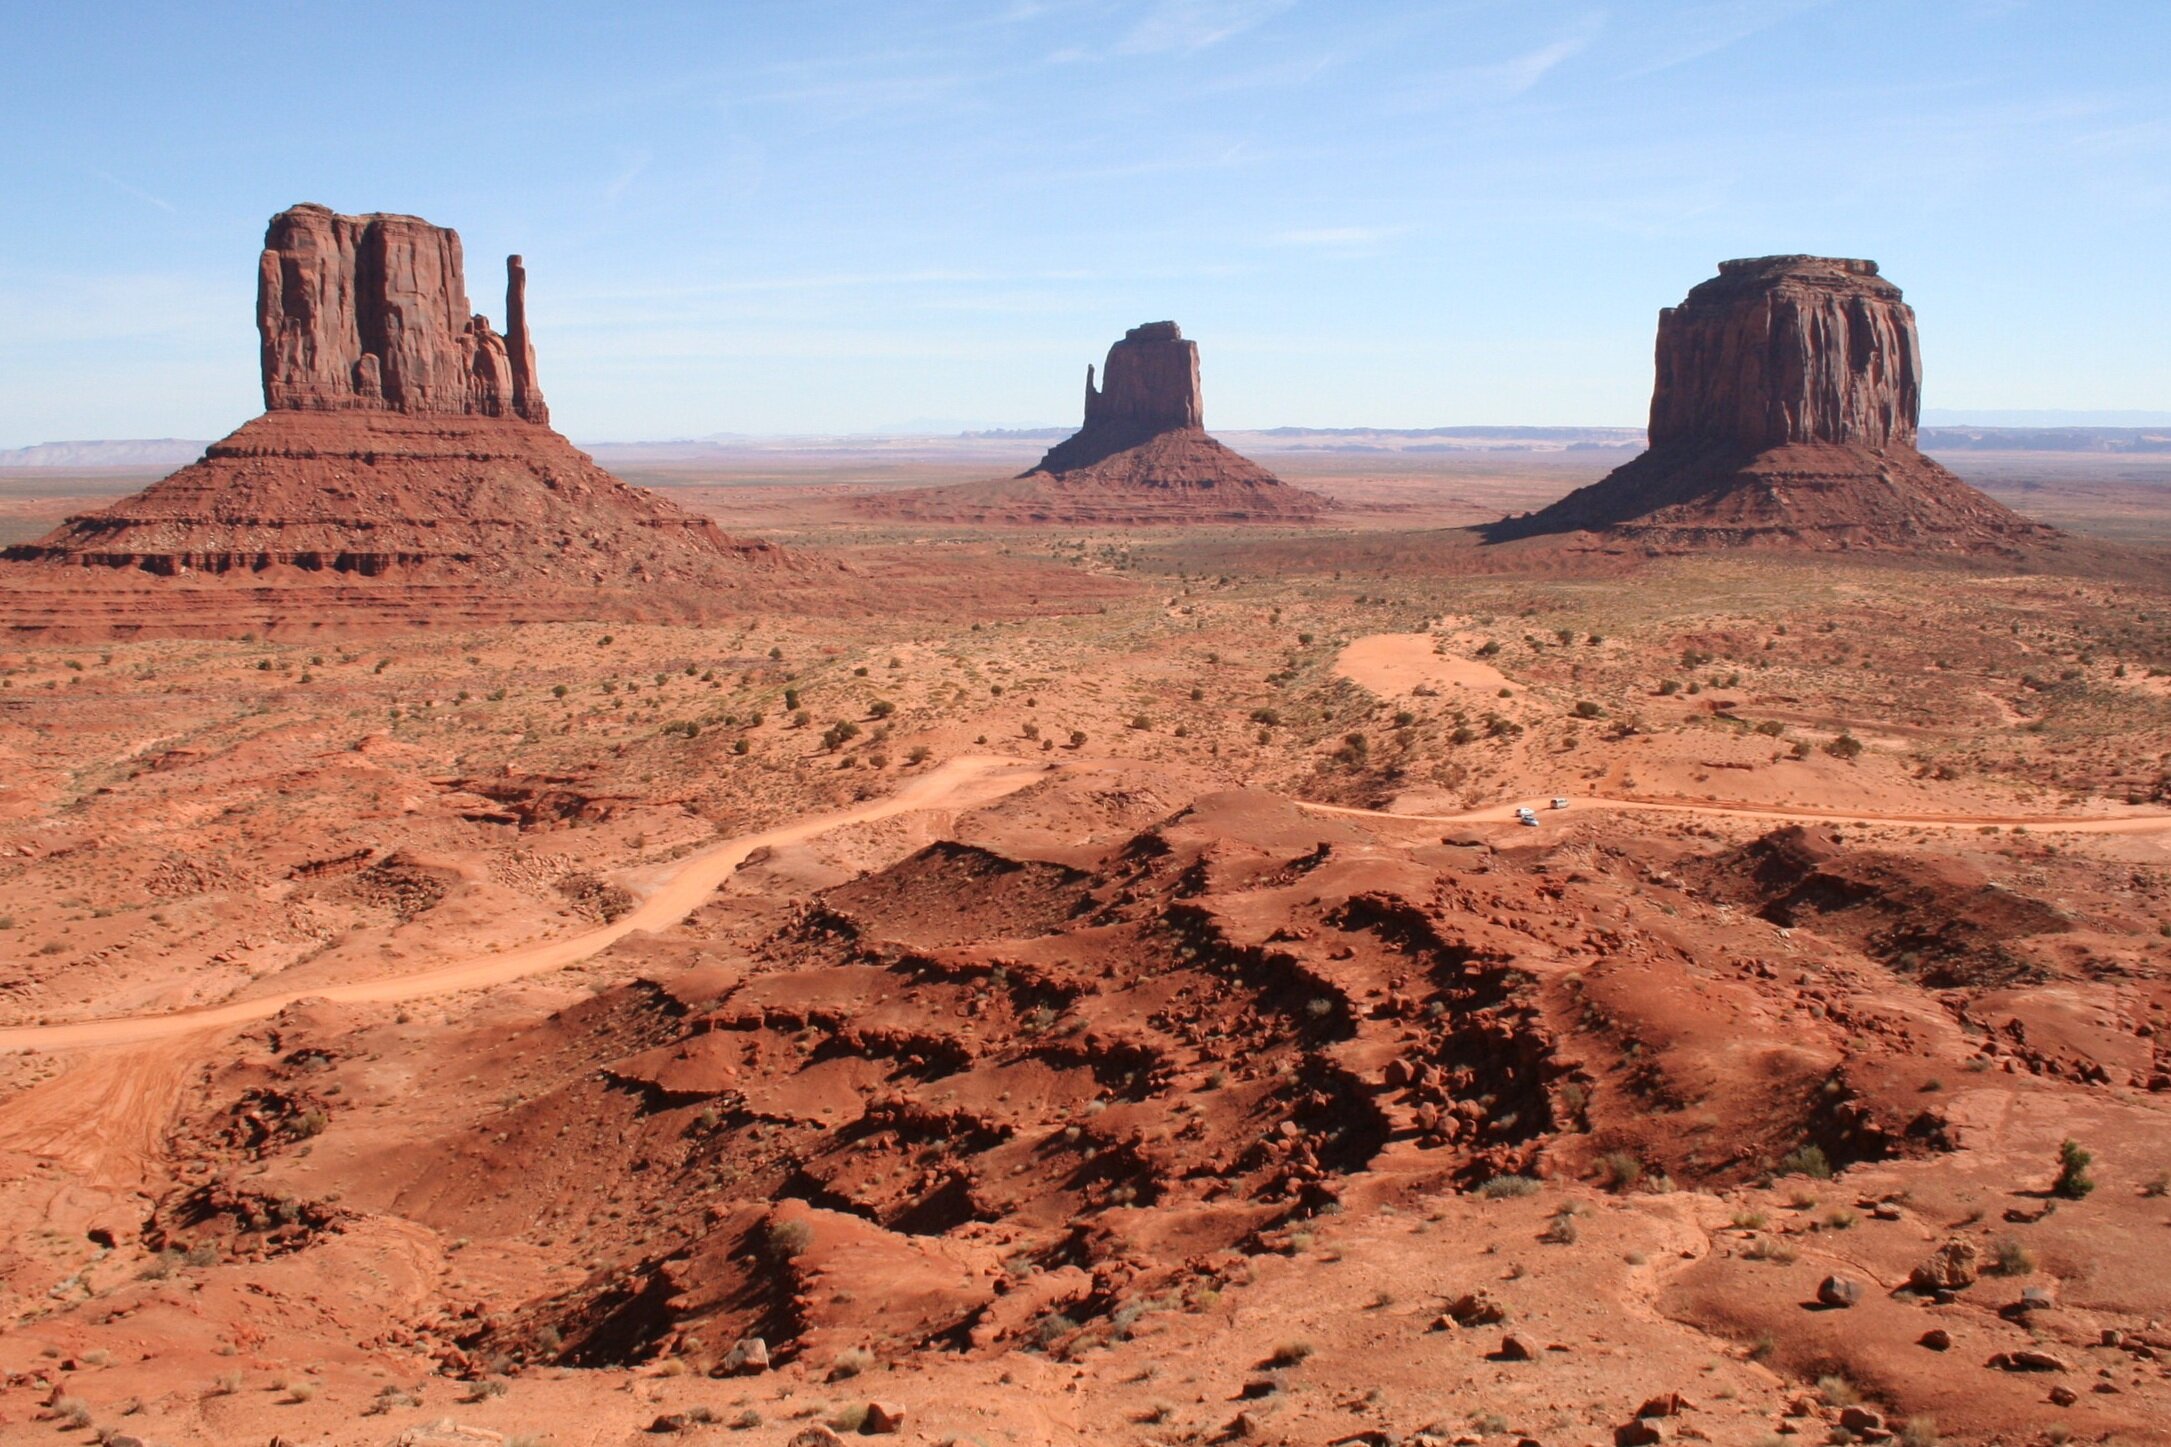   The surreal landscape of Monument Valley.  